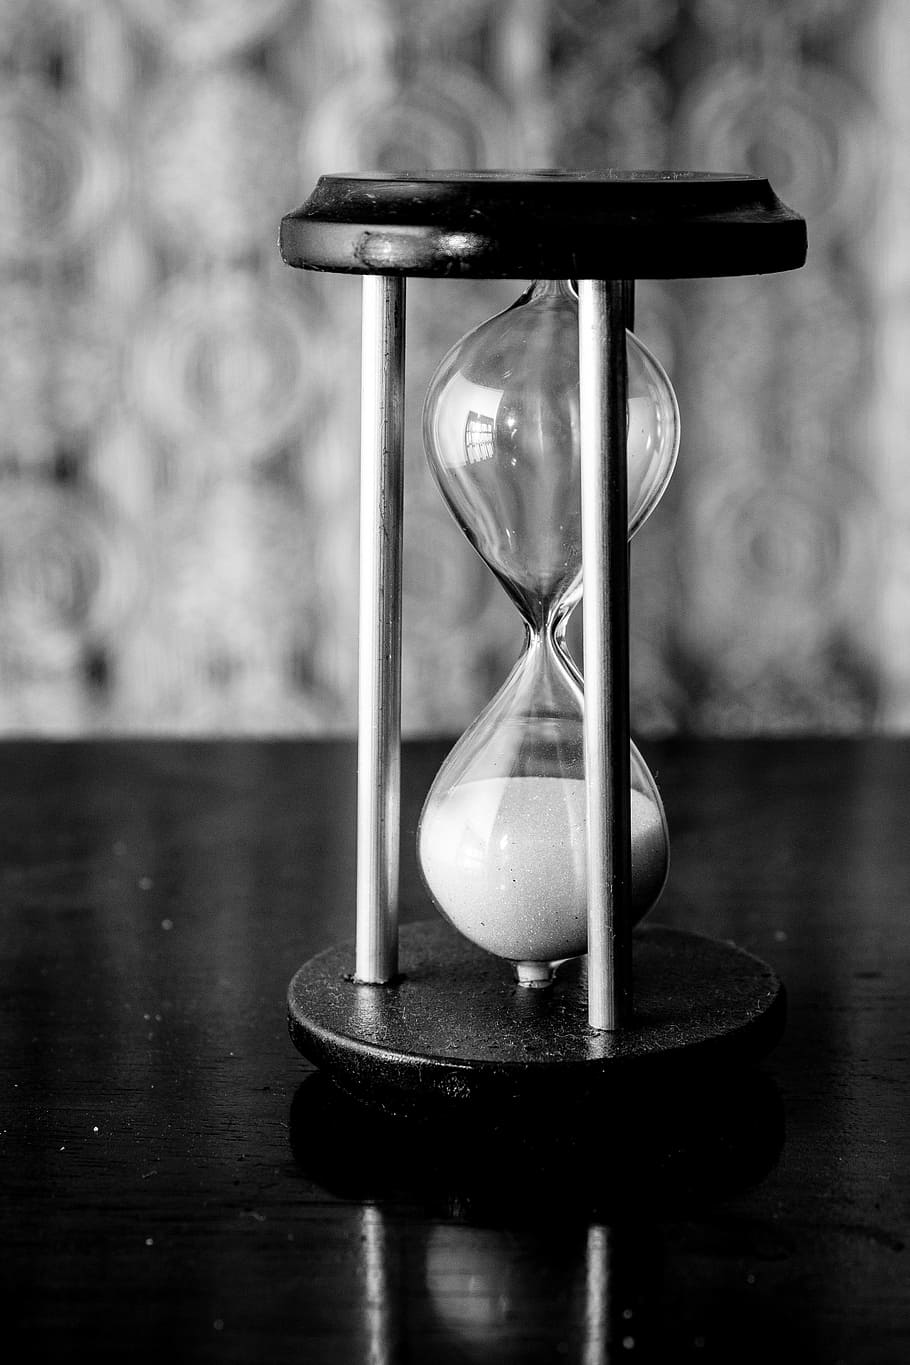 hourglass on table, Time, Clock, Hourglass, Hour, time, clock, passage of time, antique watch, watches, time clock